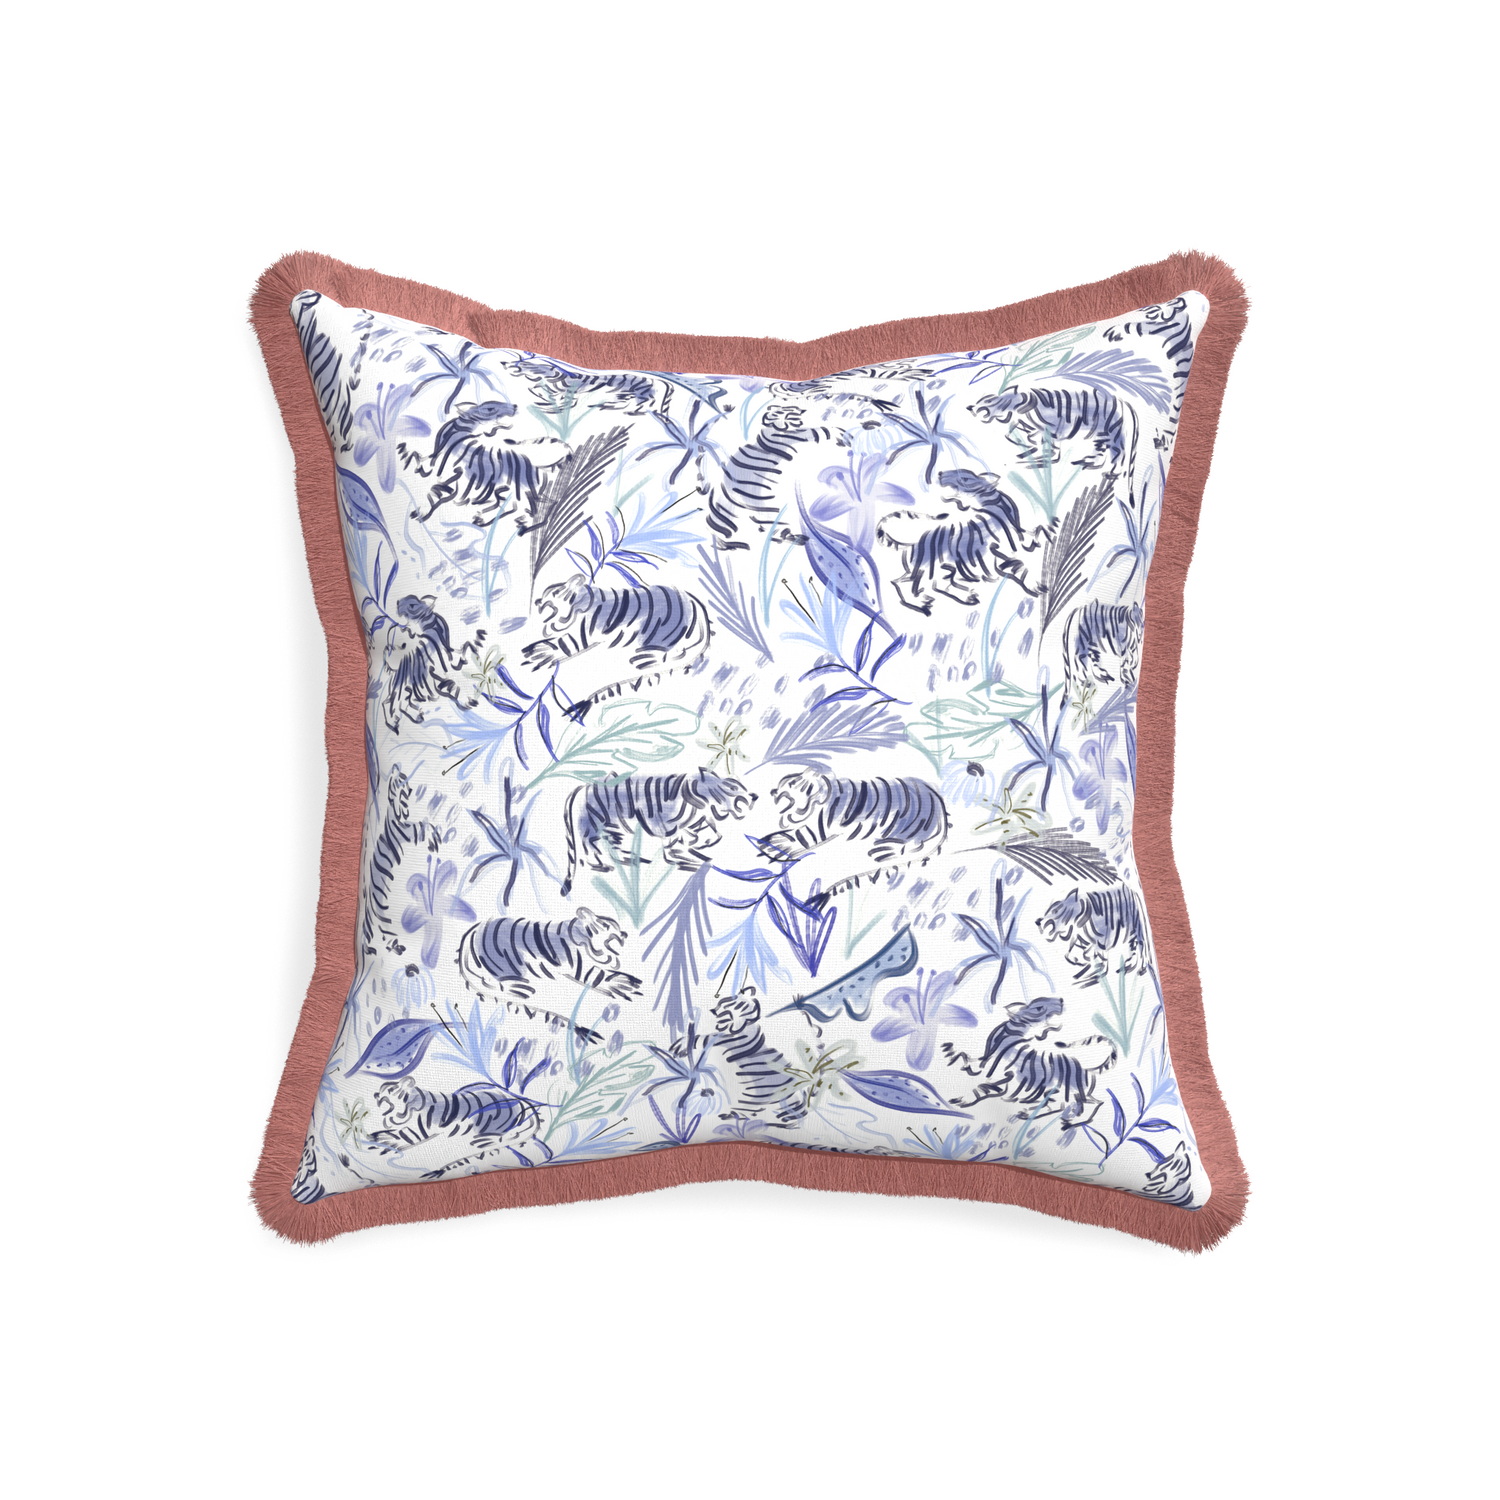 20-square frida blue custom blue with intricate tiger designpillow with d fringe on white background